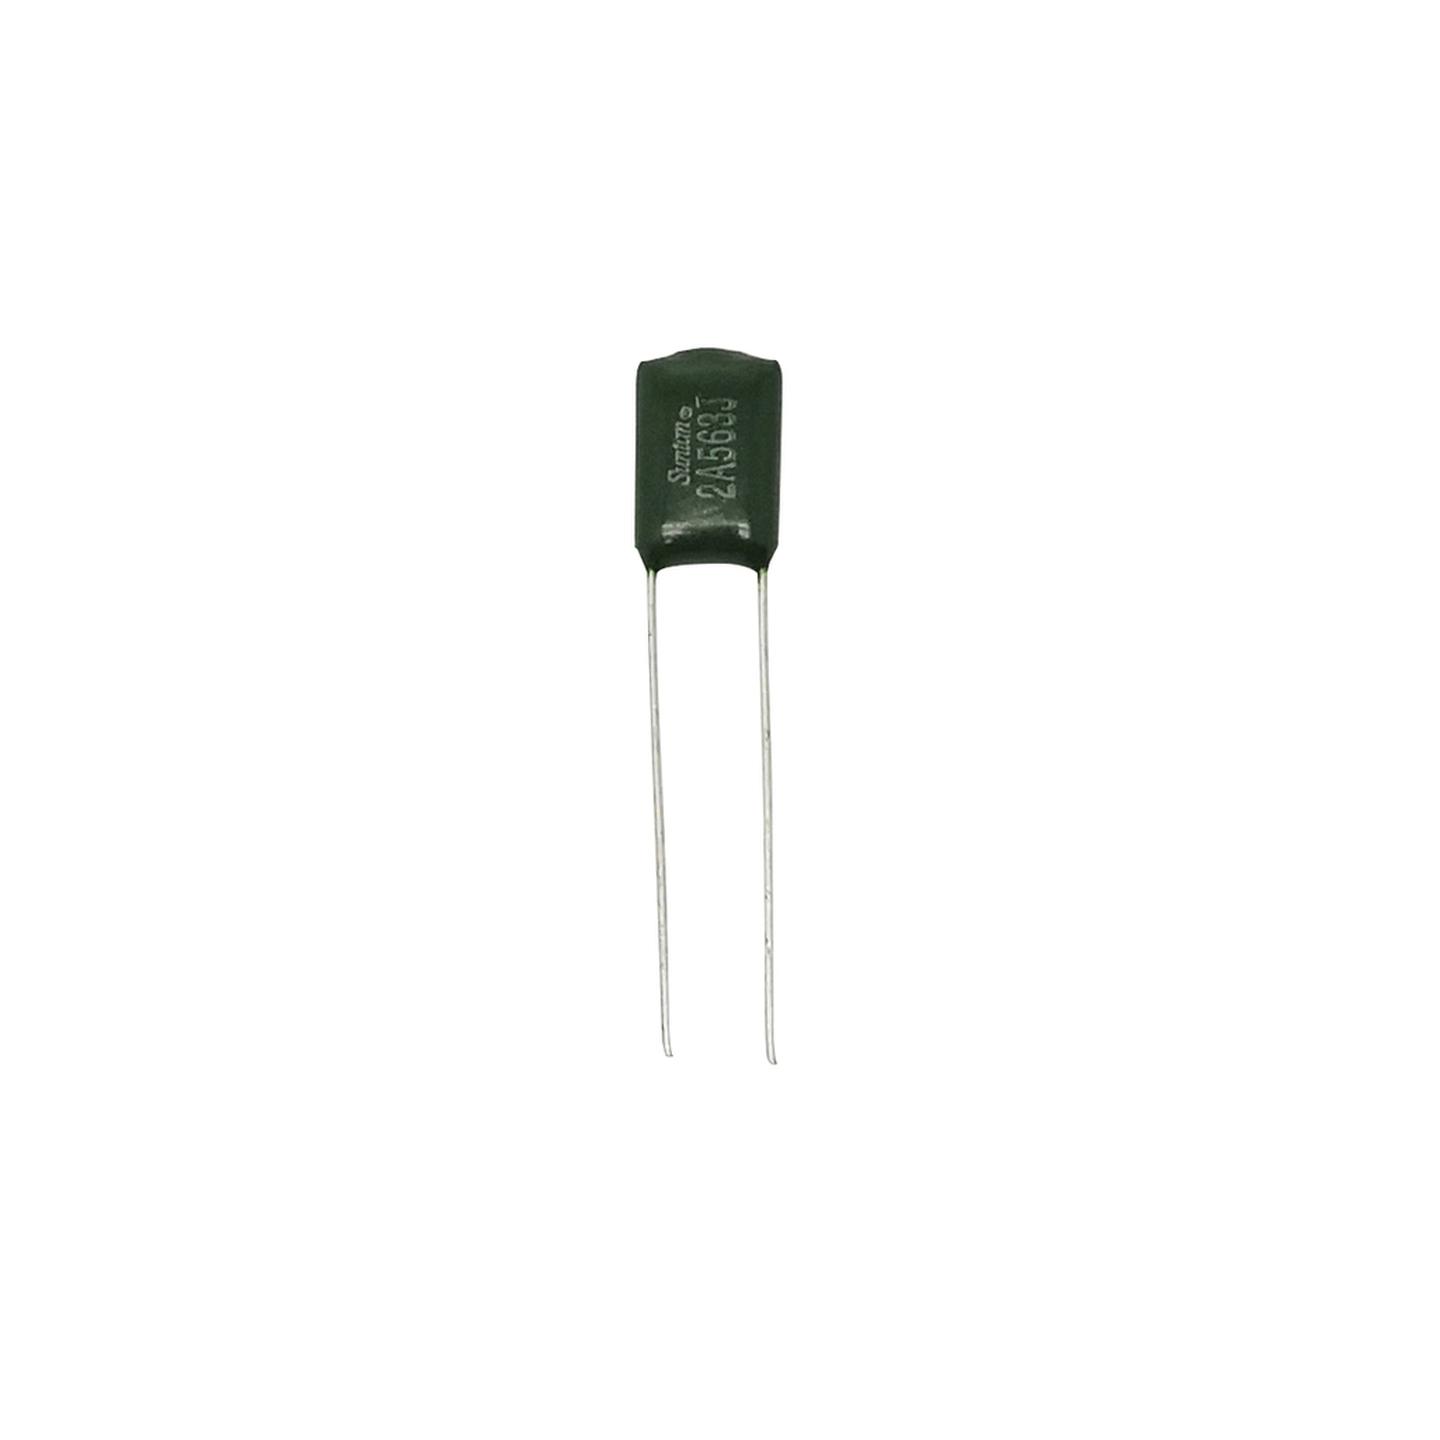 56nF 100VDC Polyester Capacitor